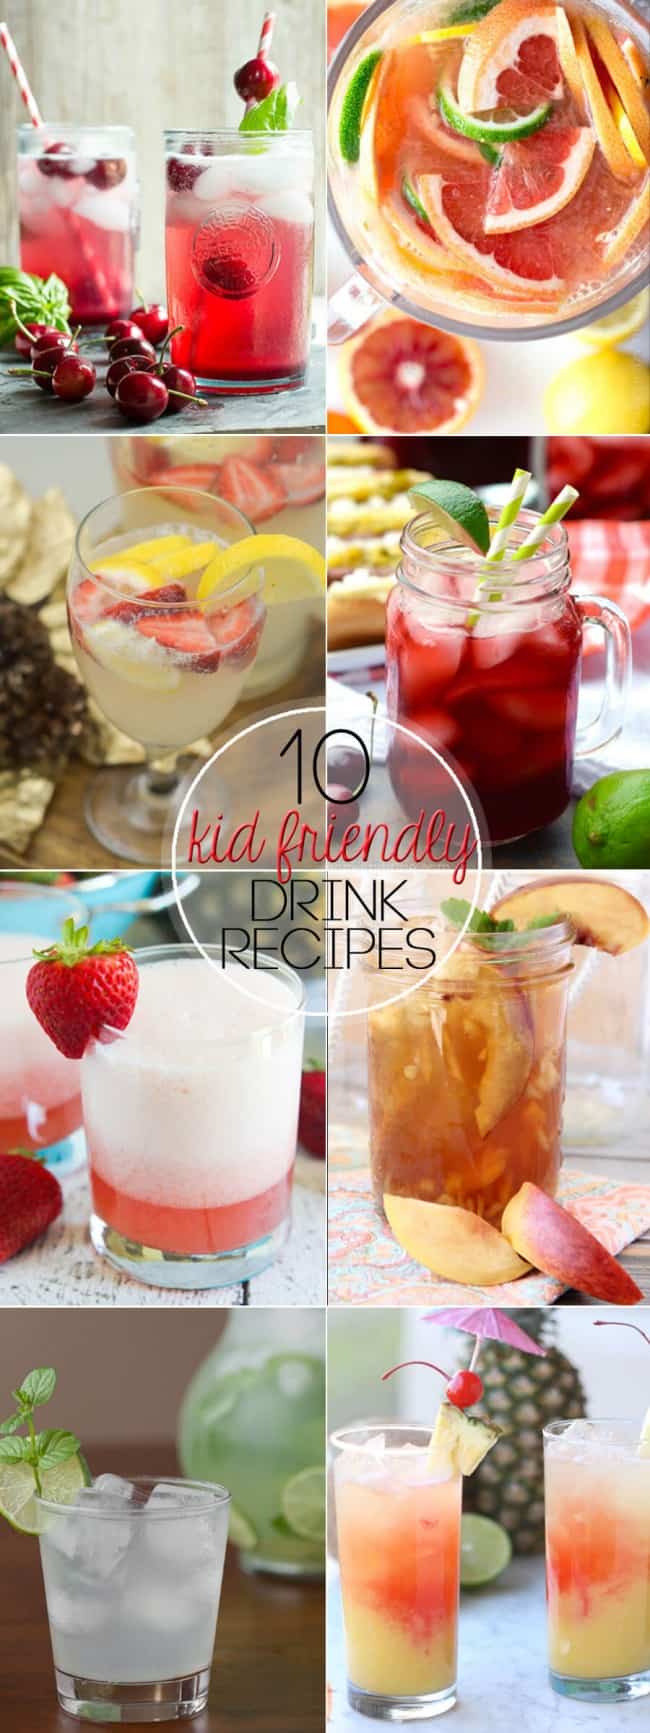 A collage of beverages with text overlay -  10 Kid-Friendly Drink Recipes.